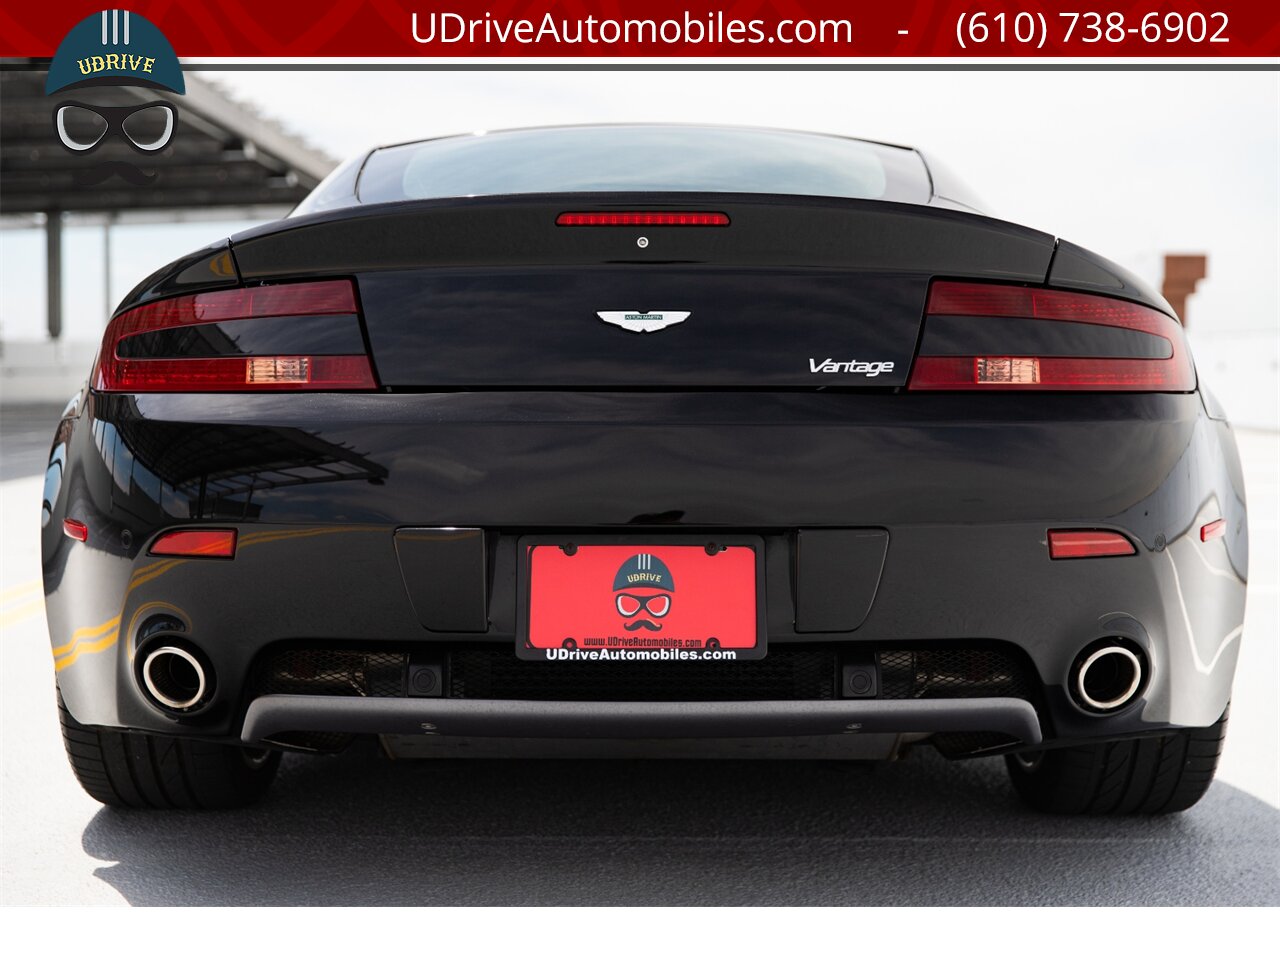 2009 Aston Martin Vantage 6 Speed Manual 1 Owner 12k Miles Sprts Pack NAV  $136,470 MSRP Red Calipers - Photo 22 - West Chester, PA 19382